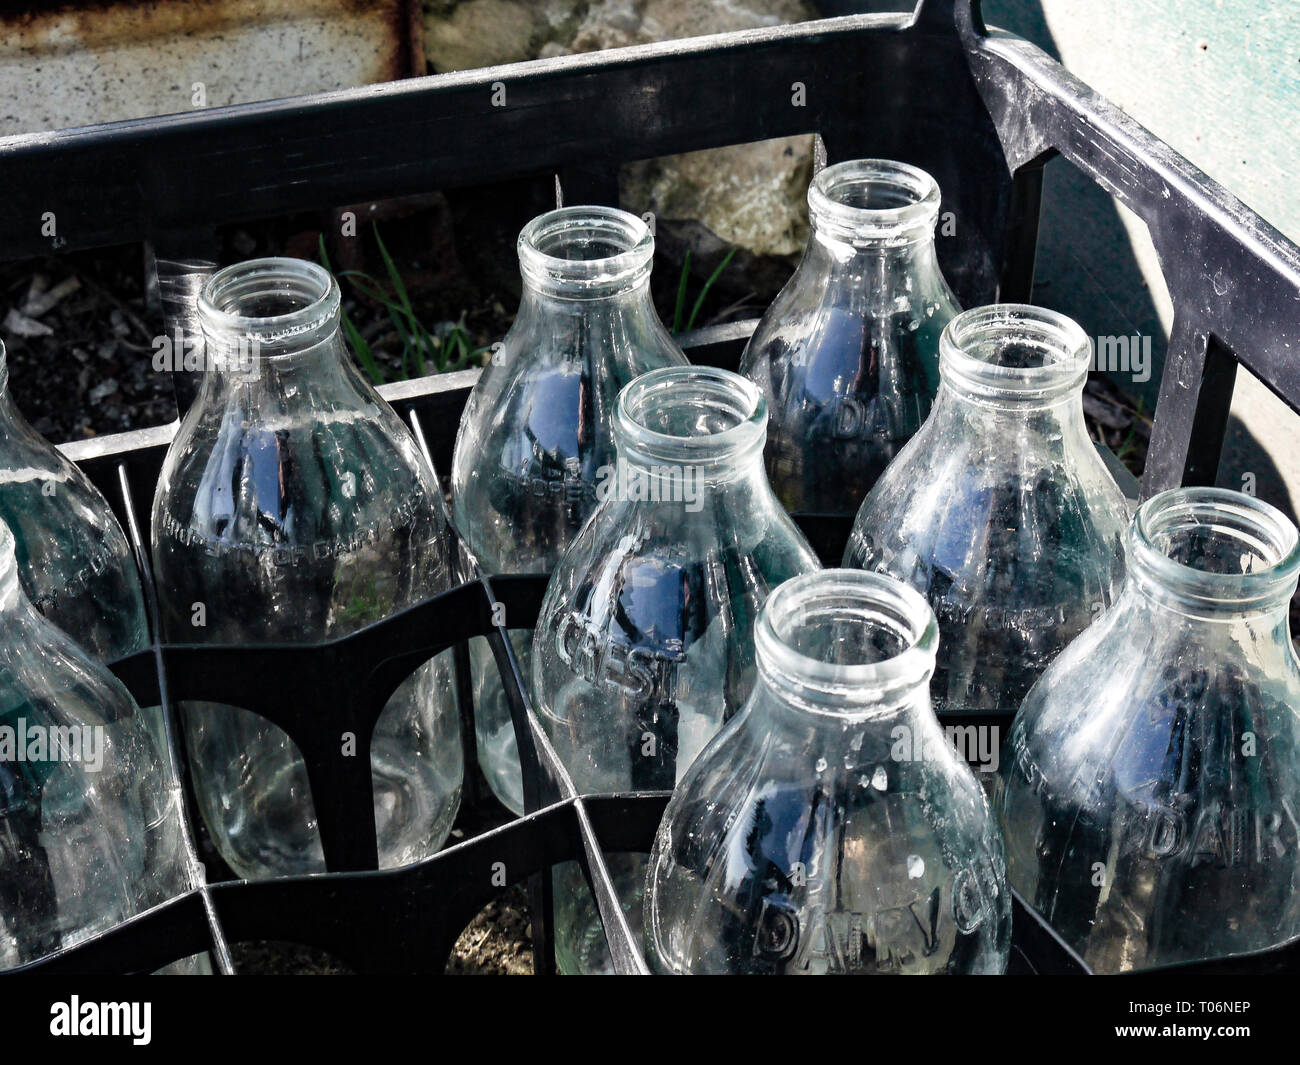 Empty glass milk bottles in a crate, UK Stock Photo